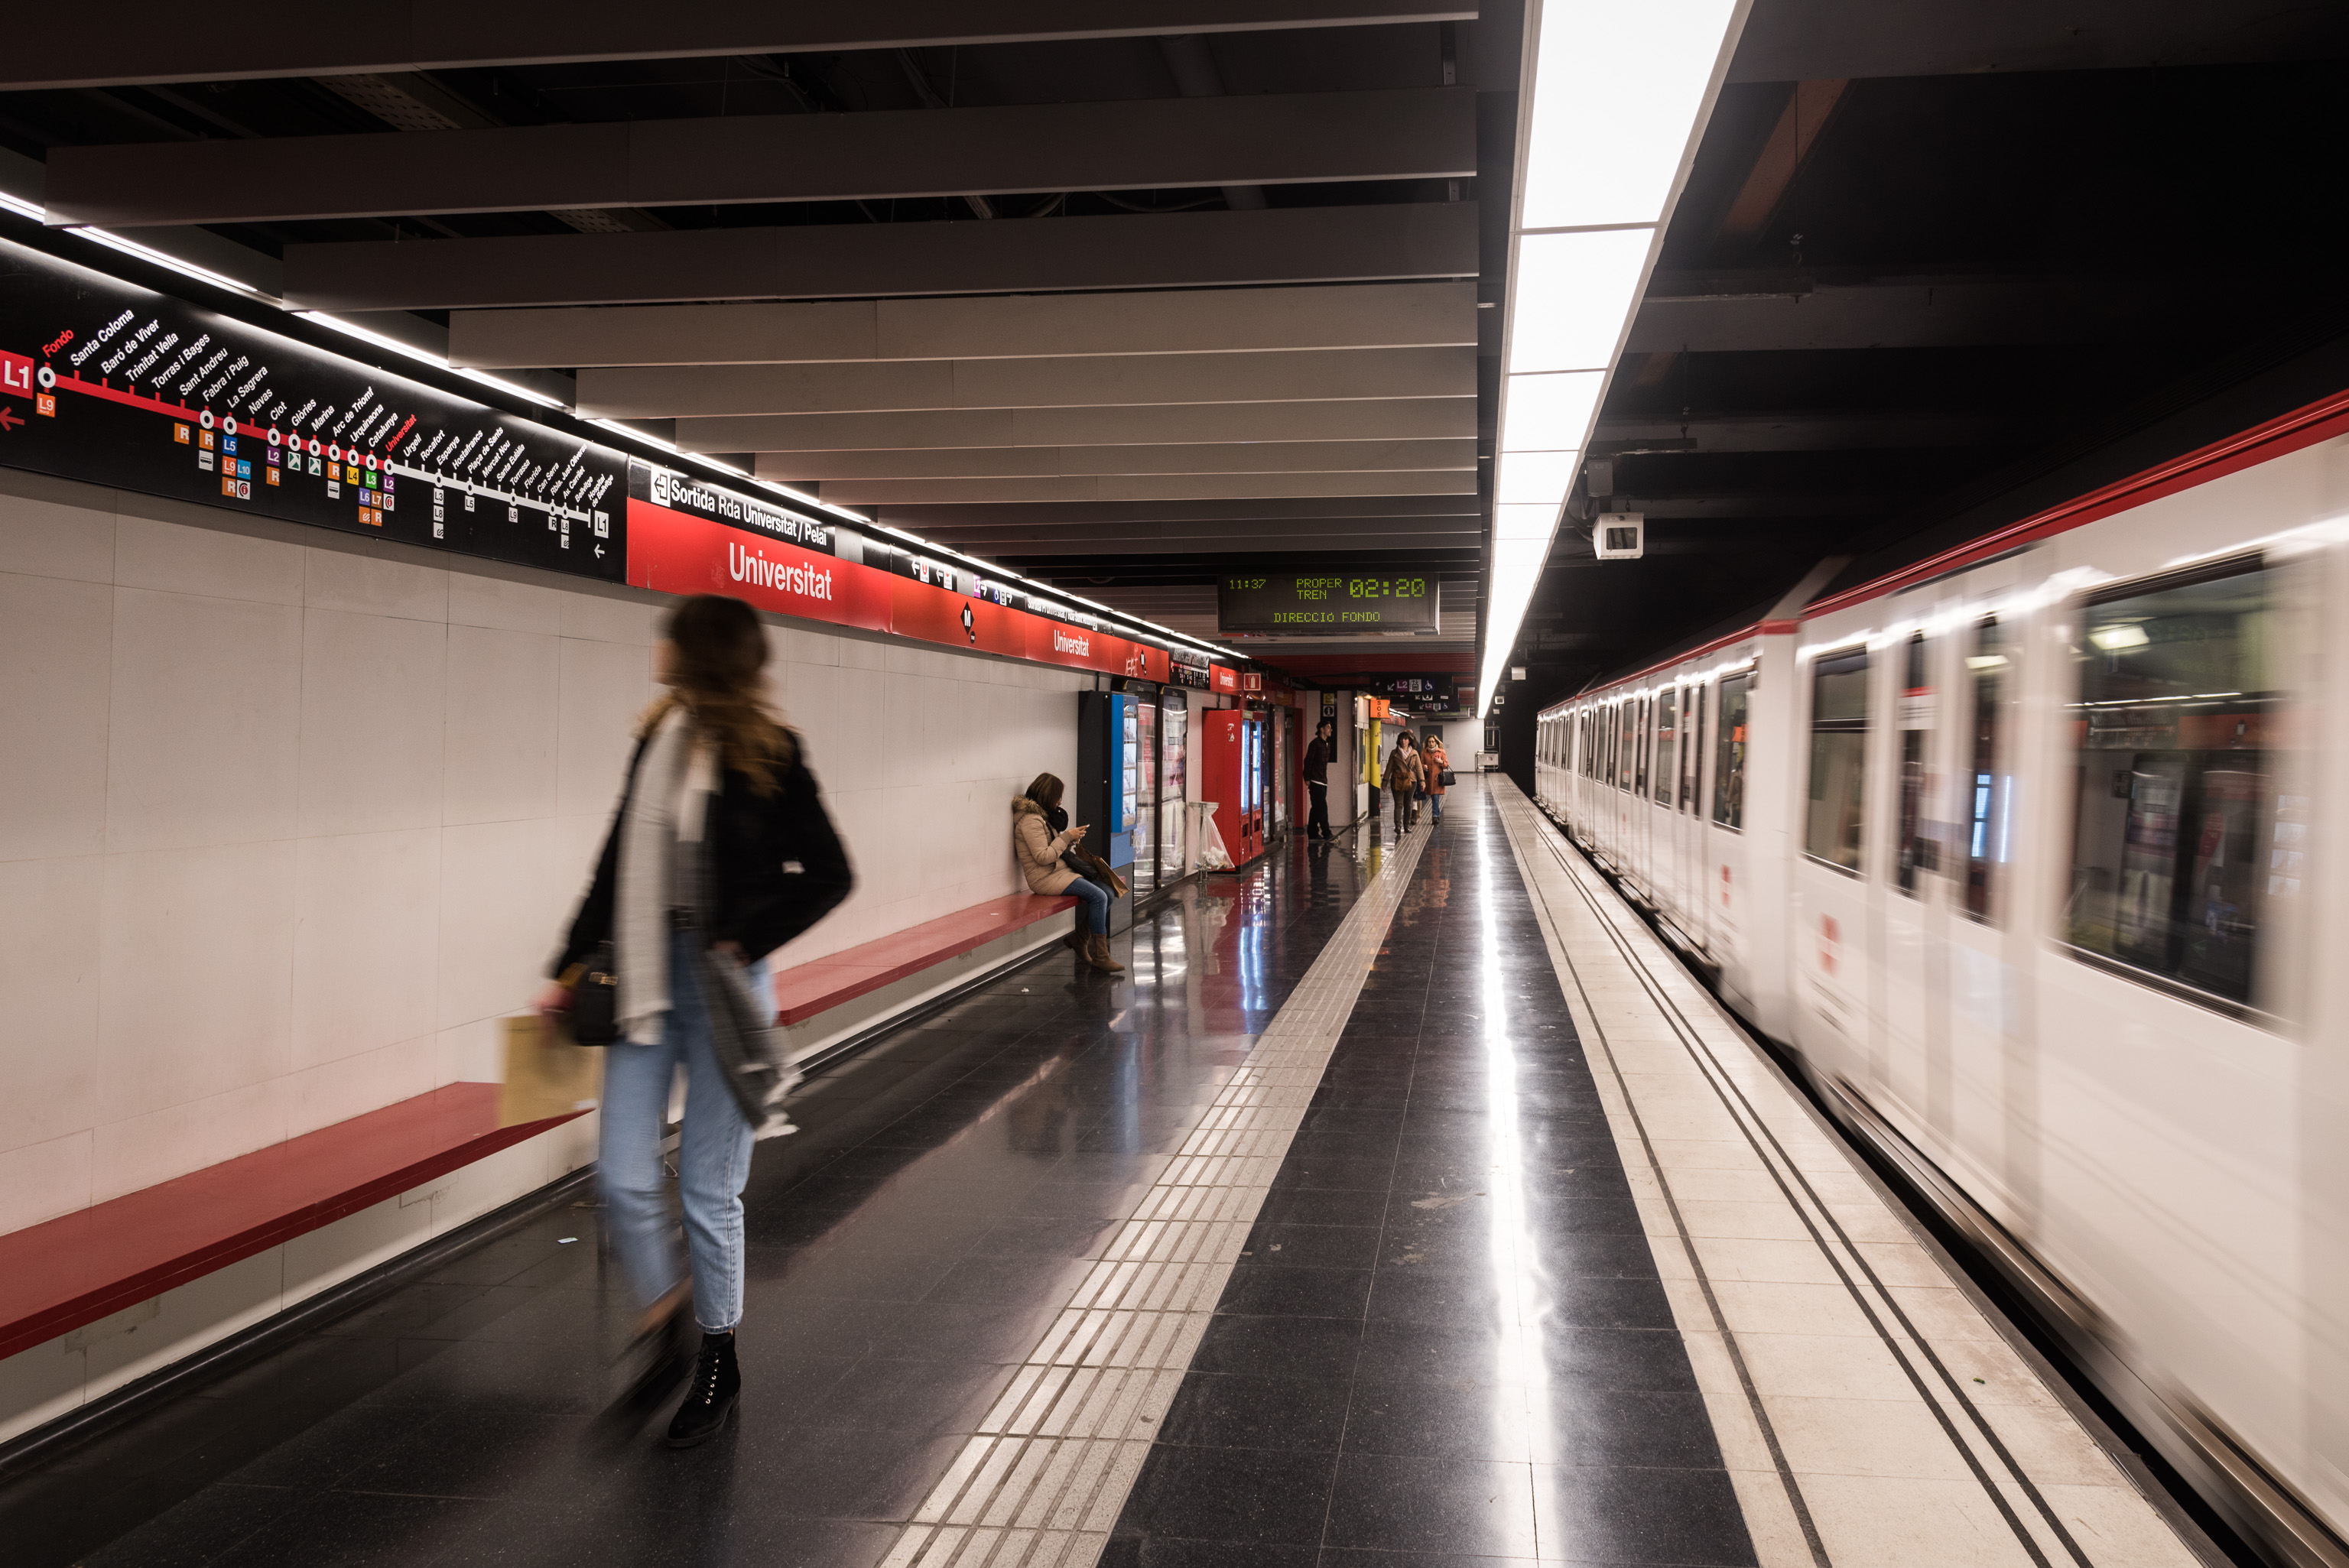 Sony cameras keep Barcelona's metro video security on track - Installation